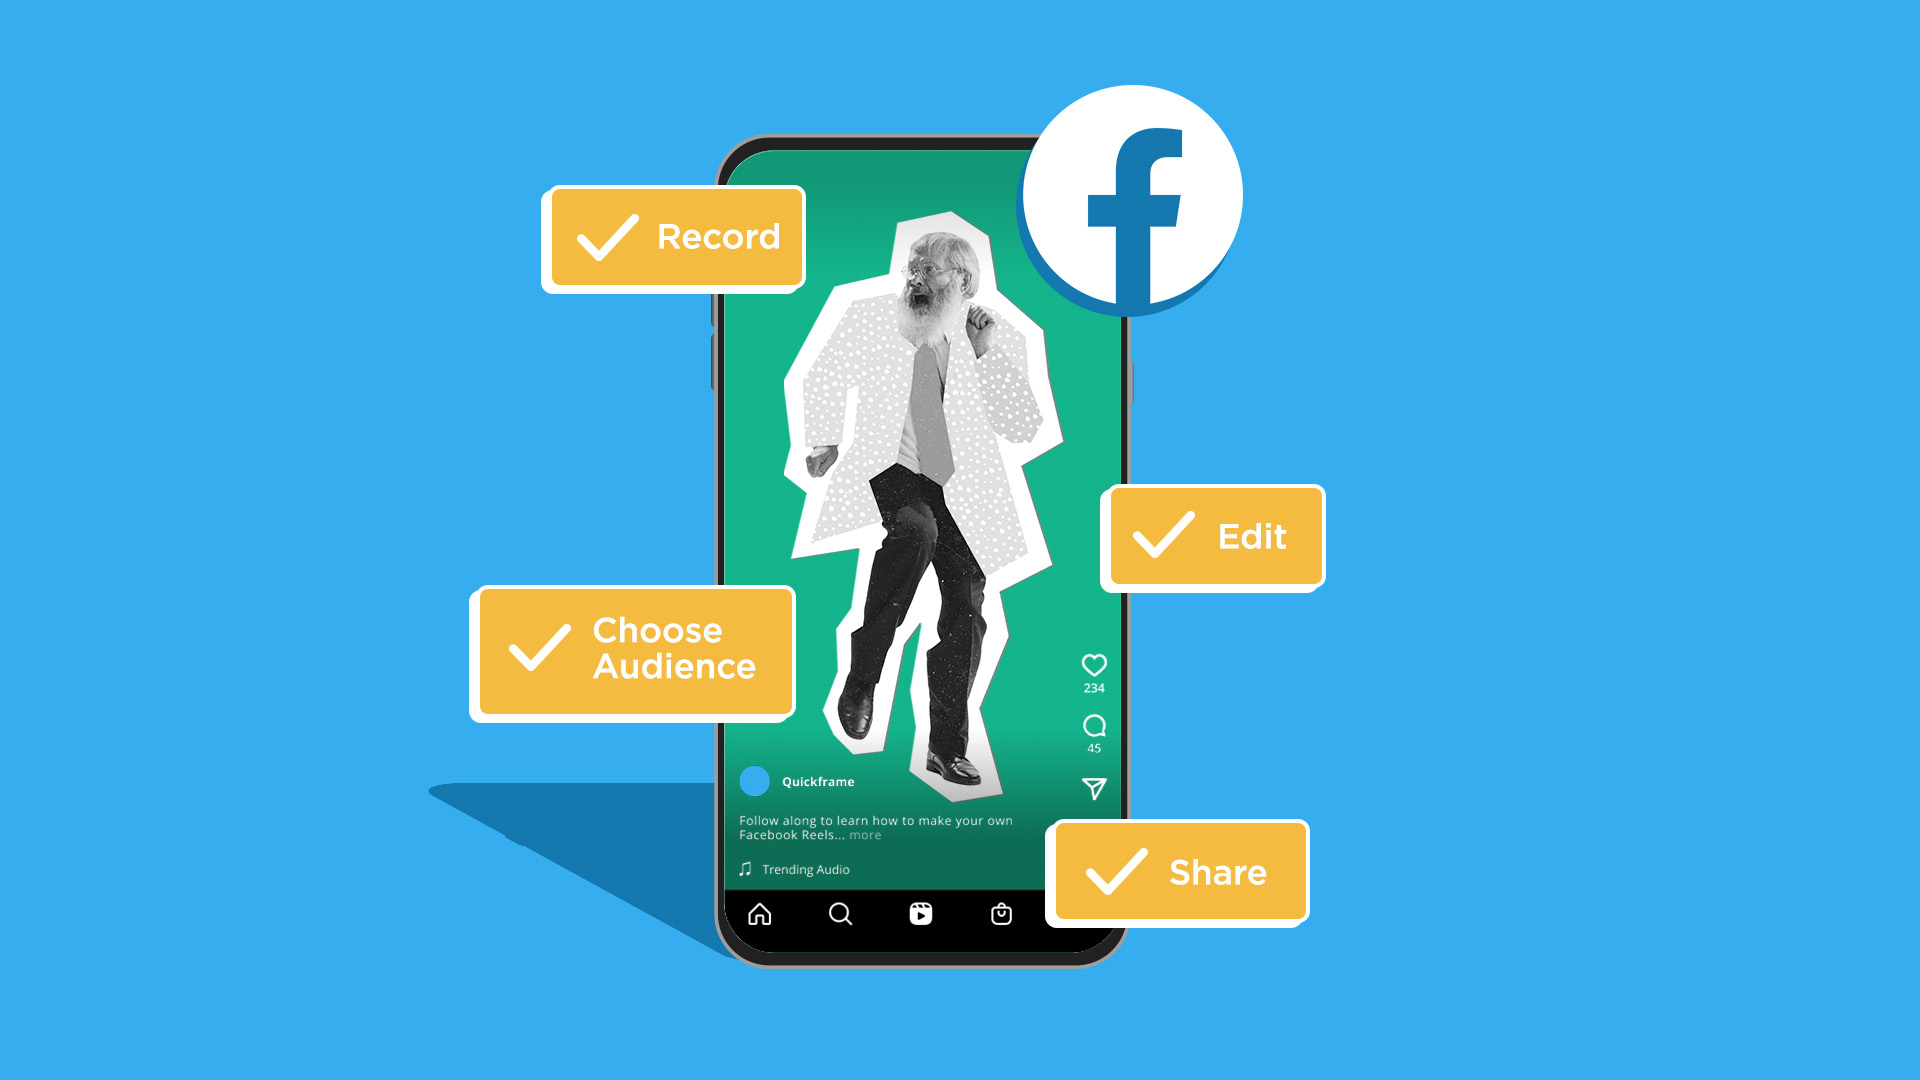 This image features a blue background with a phone on it. On the screen, there is a Facebook Reel with the Facebook logo. This image represents how to make a Reel on Facebook.